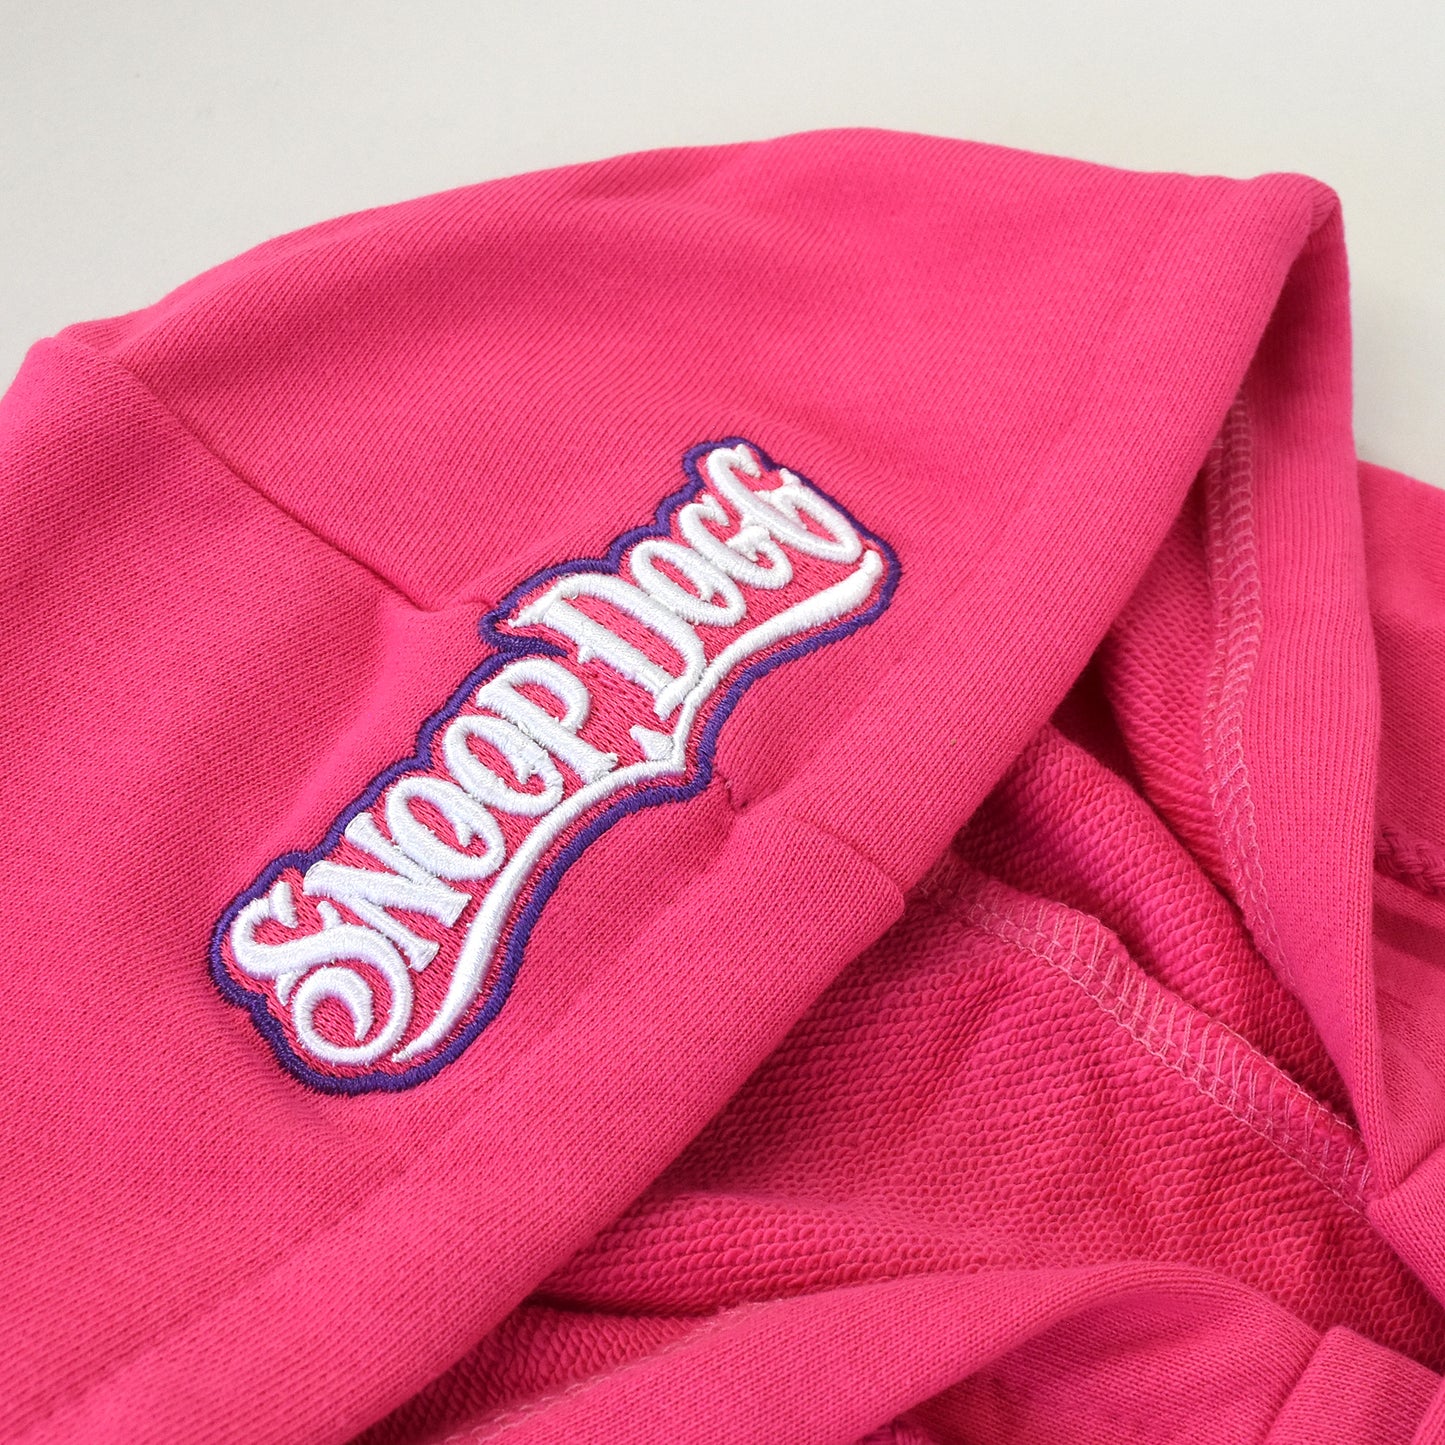 A close up detail image of the Snoop Dogg embroidered logo on the hood of the Boss Lady Deluxe Pet Hoodie.